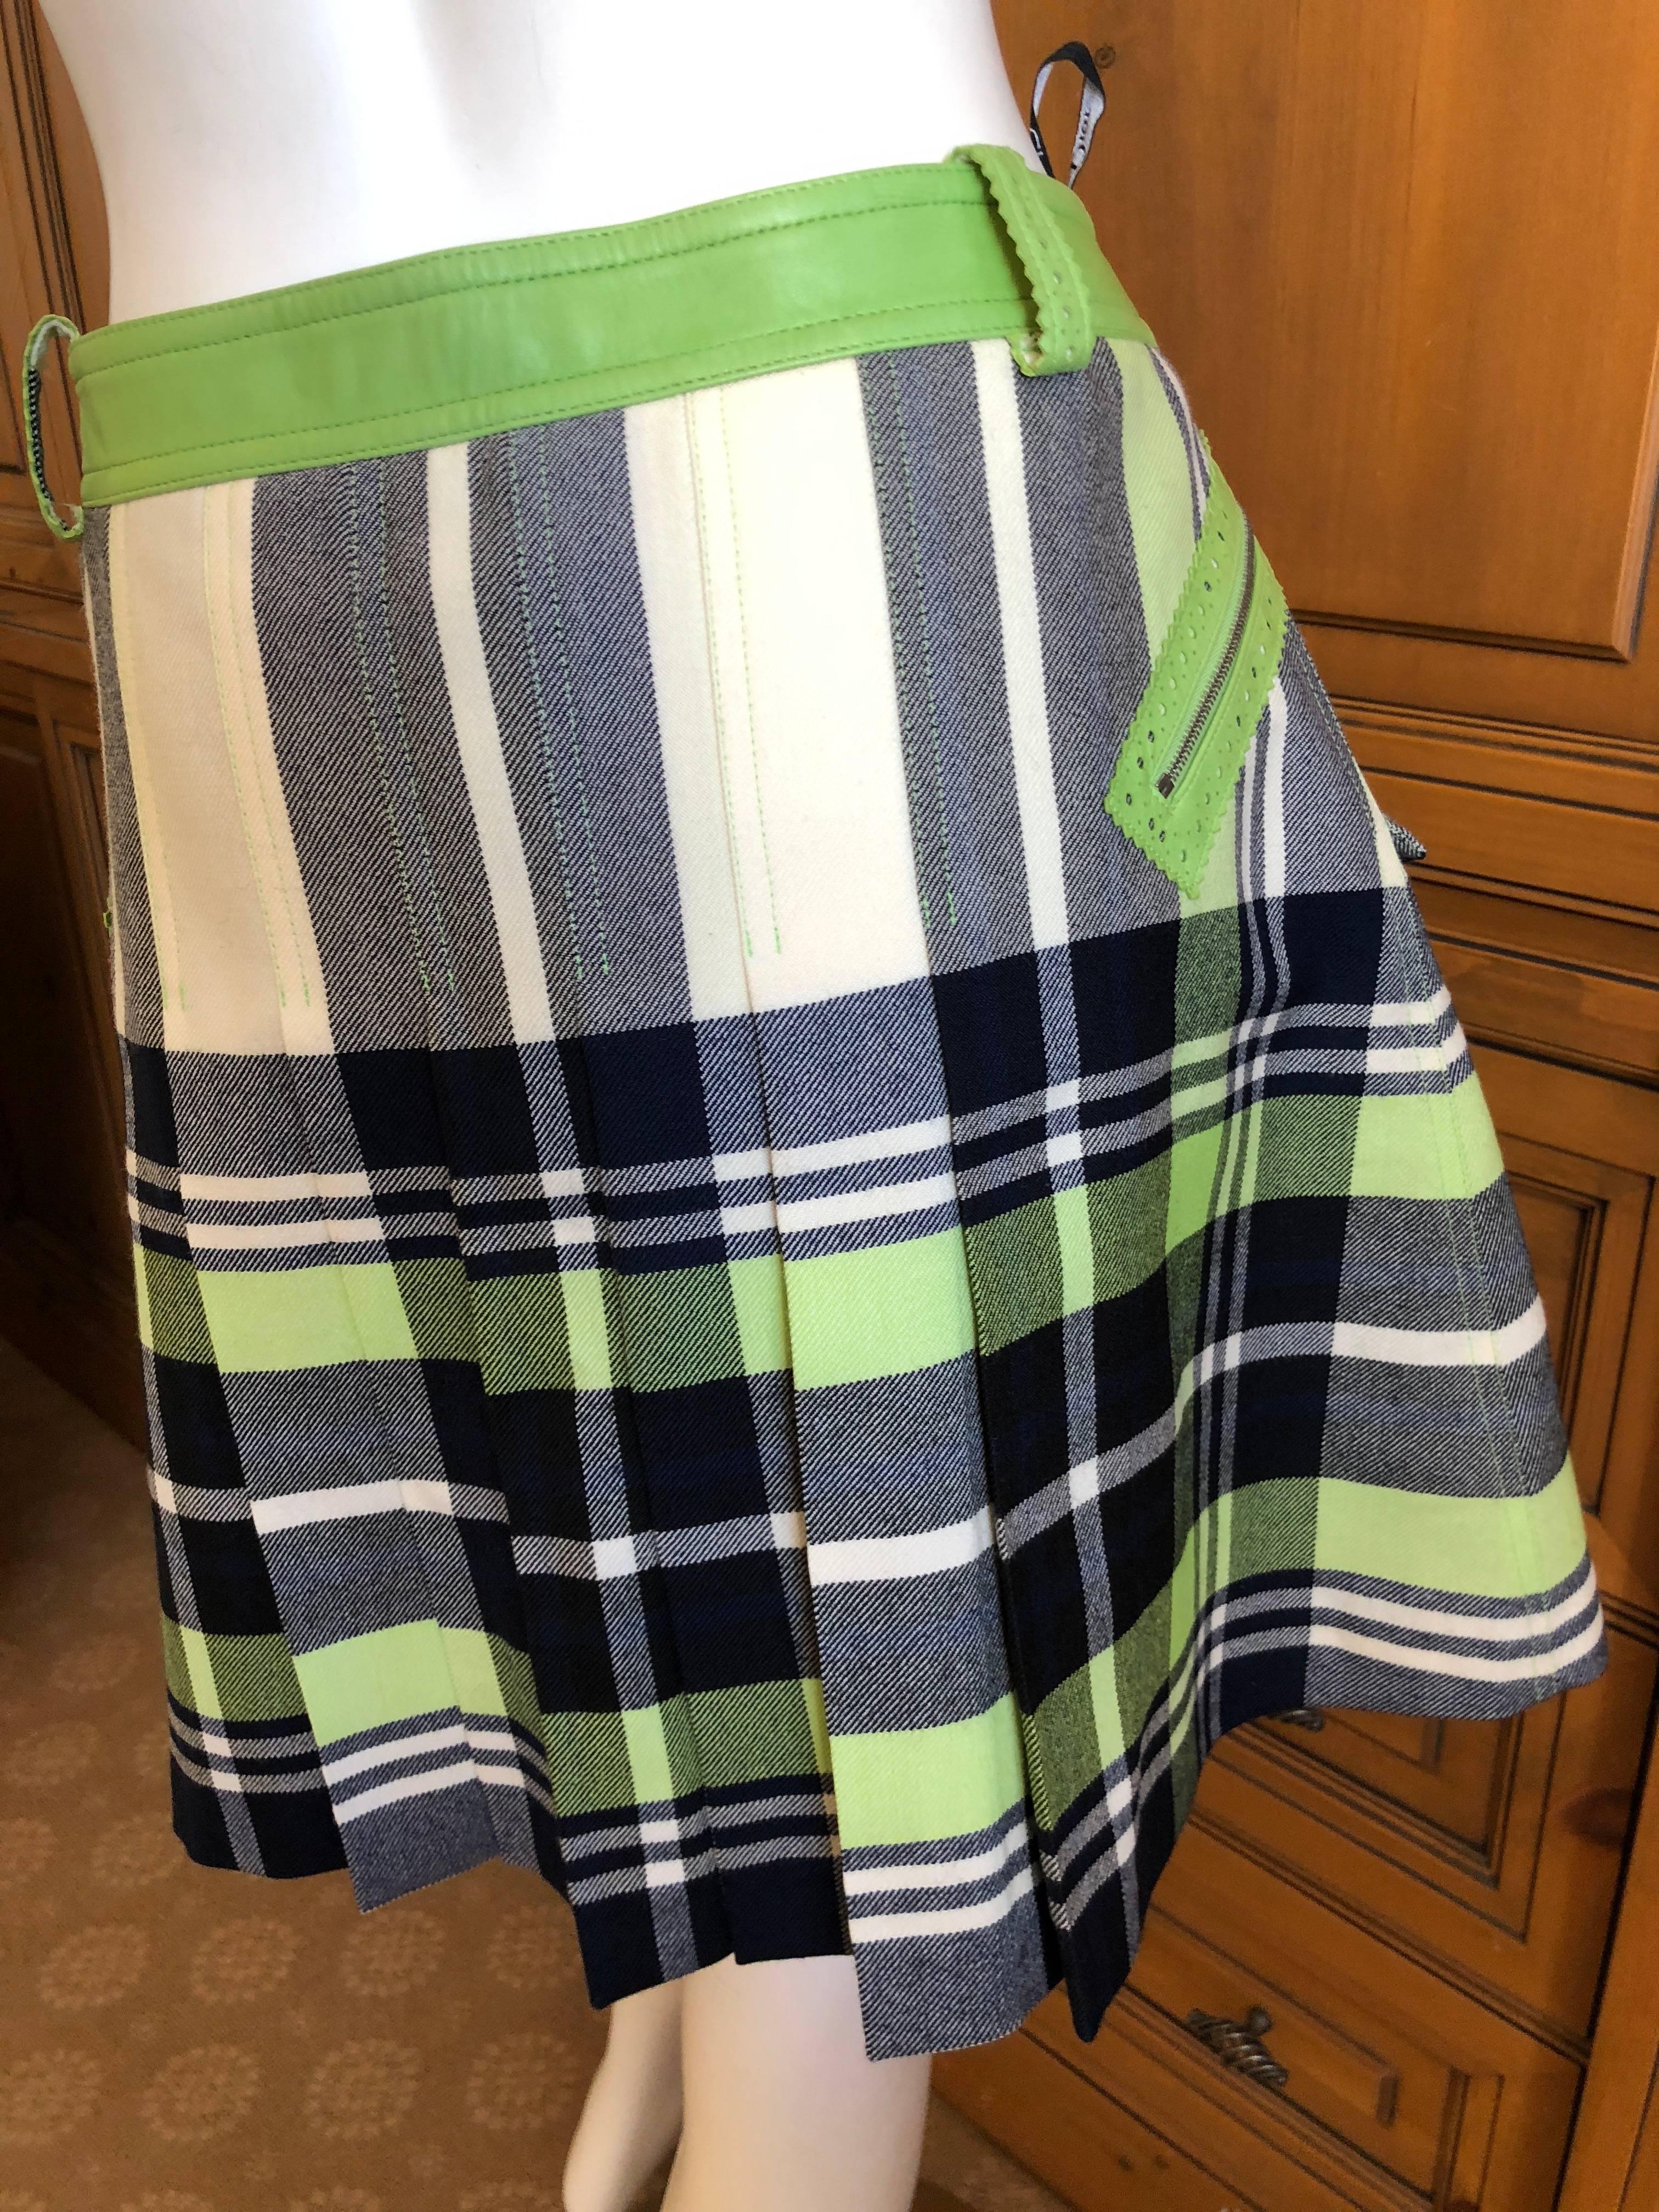 Christian Dior John Galliano Vintage Leather Trim Pleated Plaid Schoolgirl Skirt In Excellent Condition For Sale In Cloverdale, CA